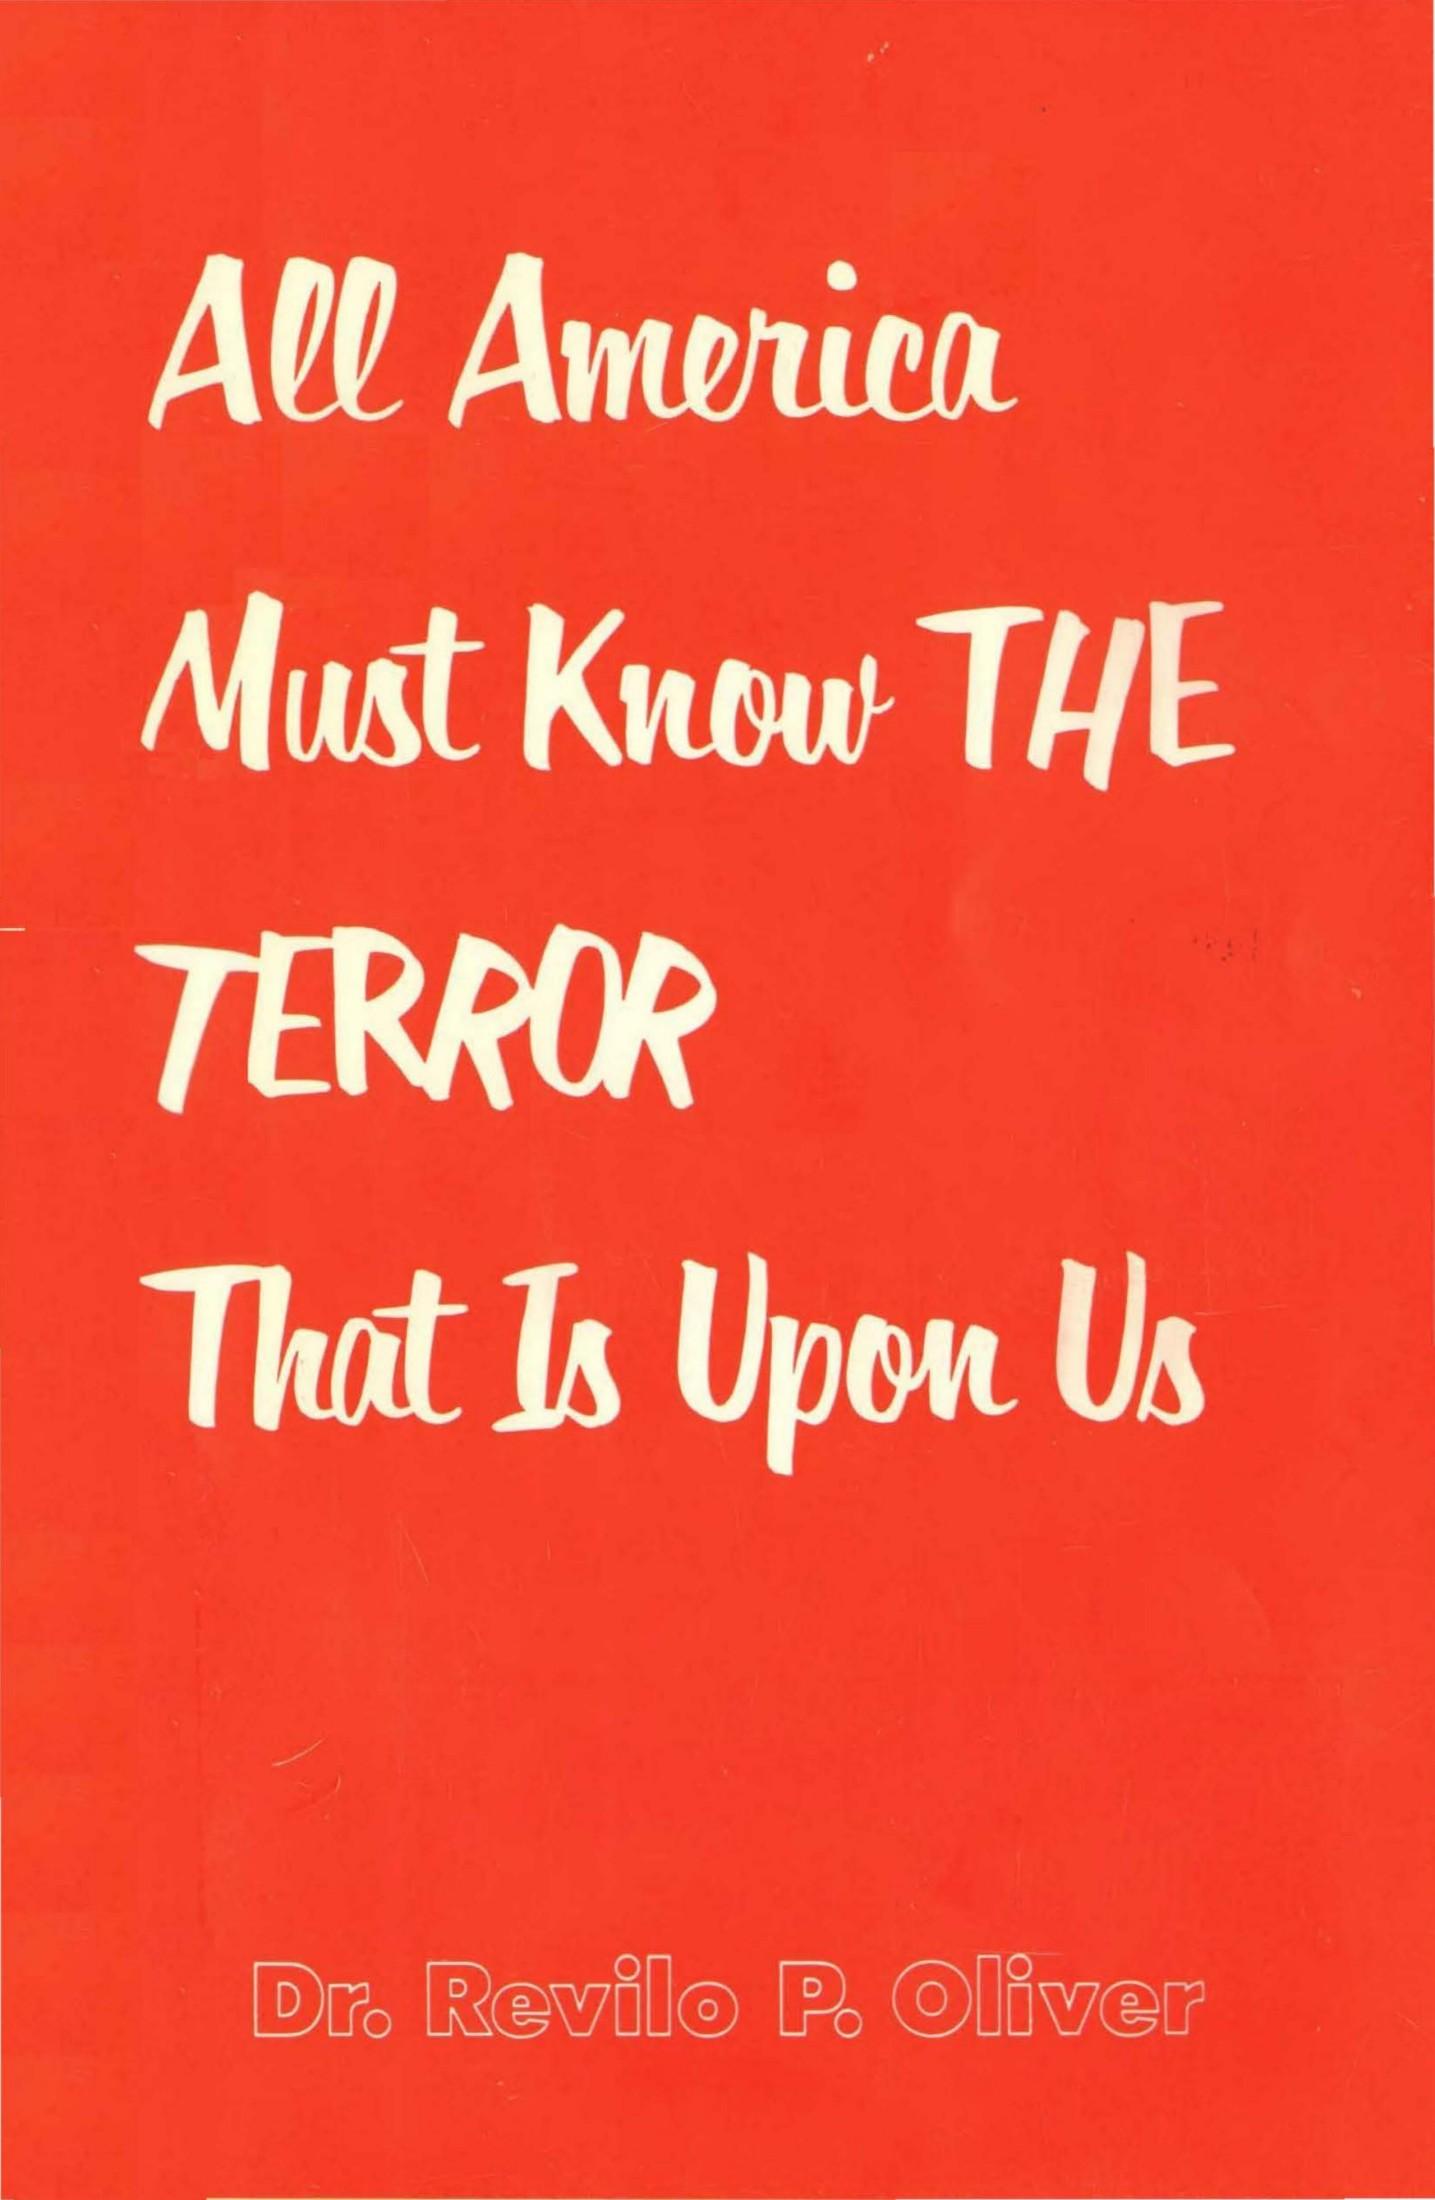 All America Must Know THE TERROR That Is Upon Us (1959) by Revilo P. Oliver